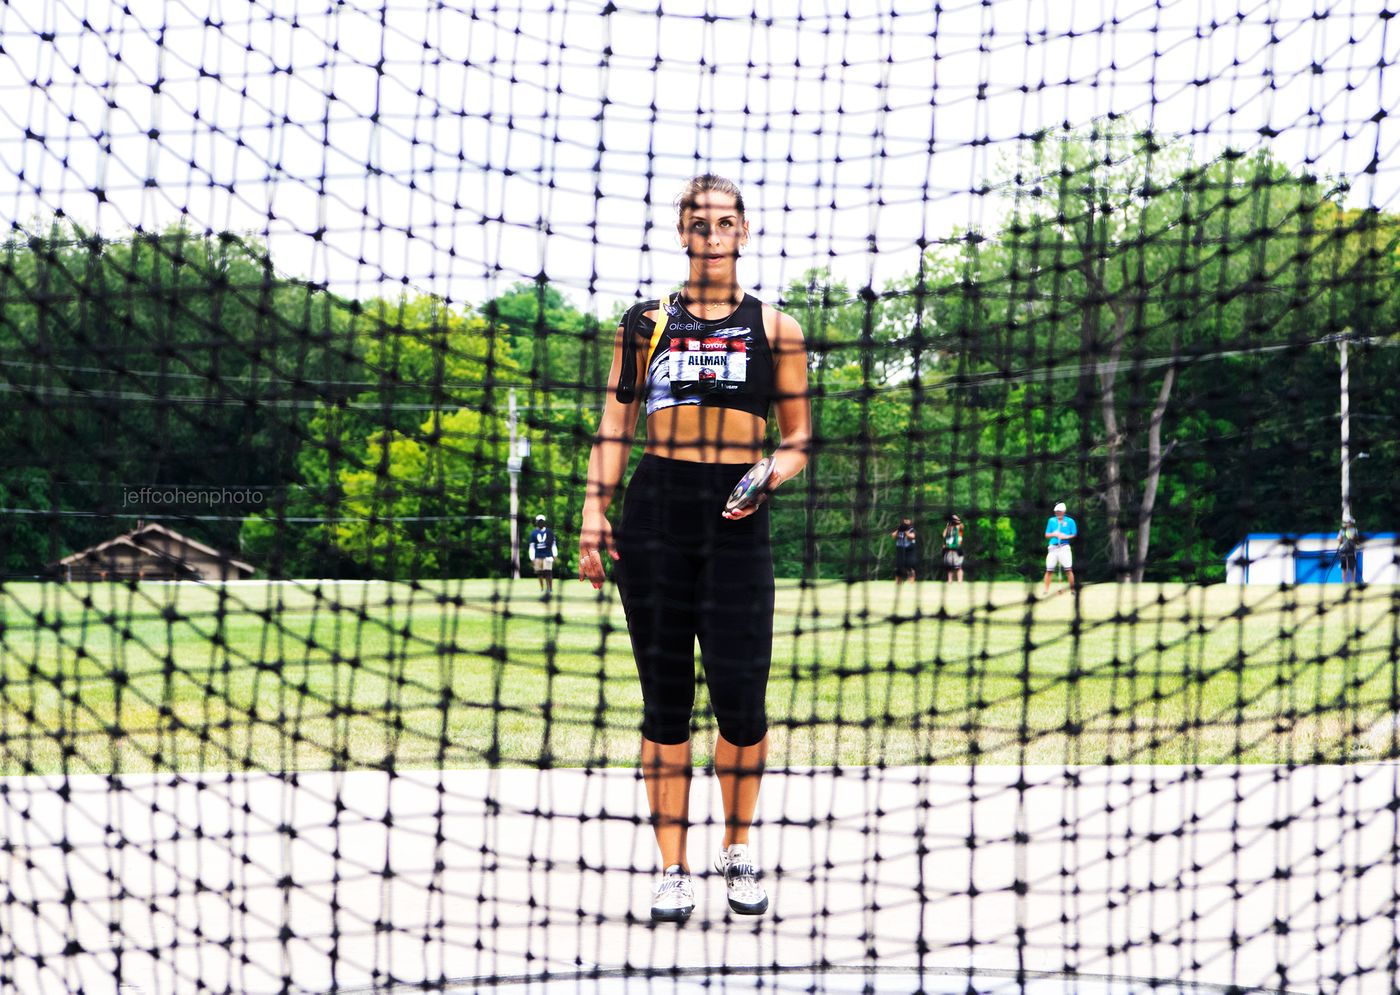 2019-USATF-Outdoor-Champs-day-4-allman-discus-w-5602---jeff-cohen-photo--web.jpg